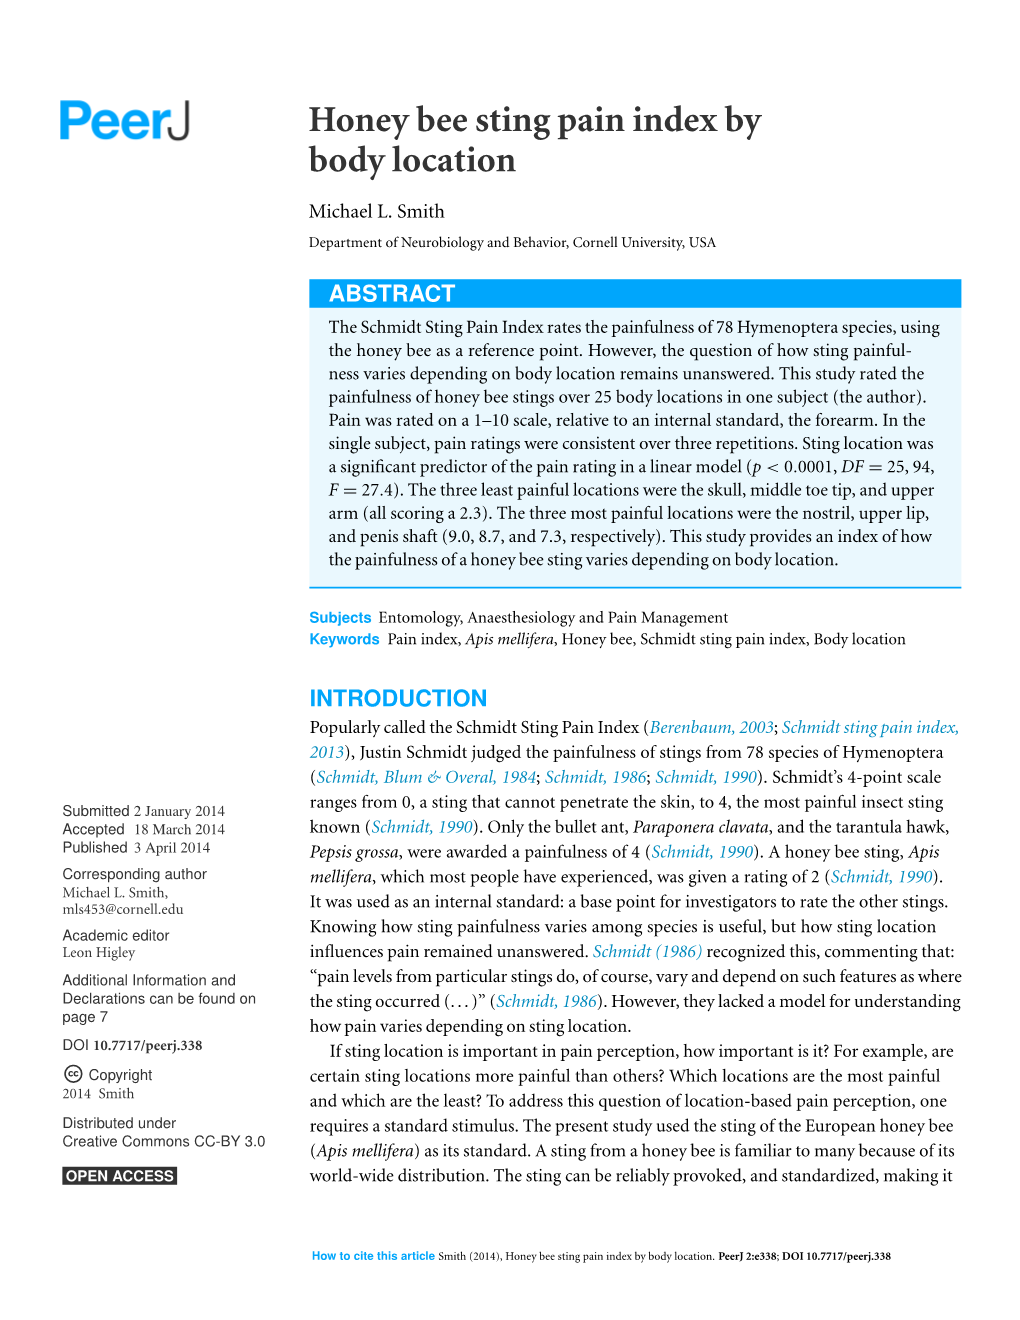 Honey Bee Sting Pain Index by Body Location